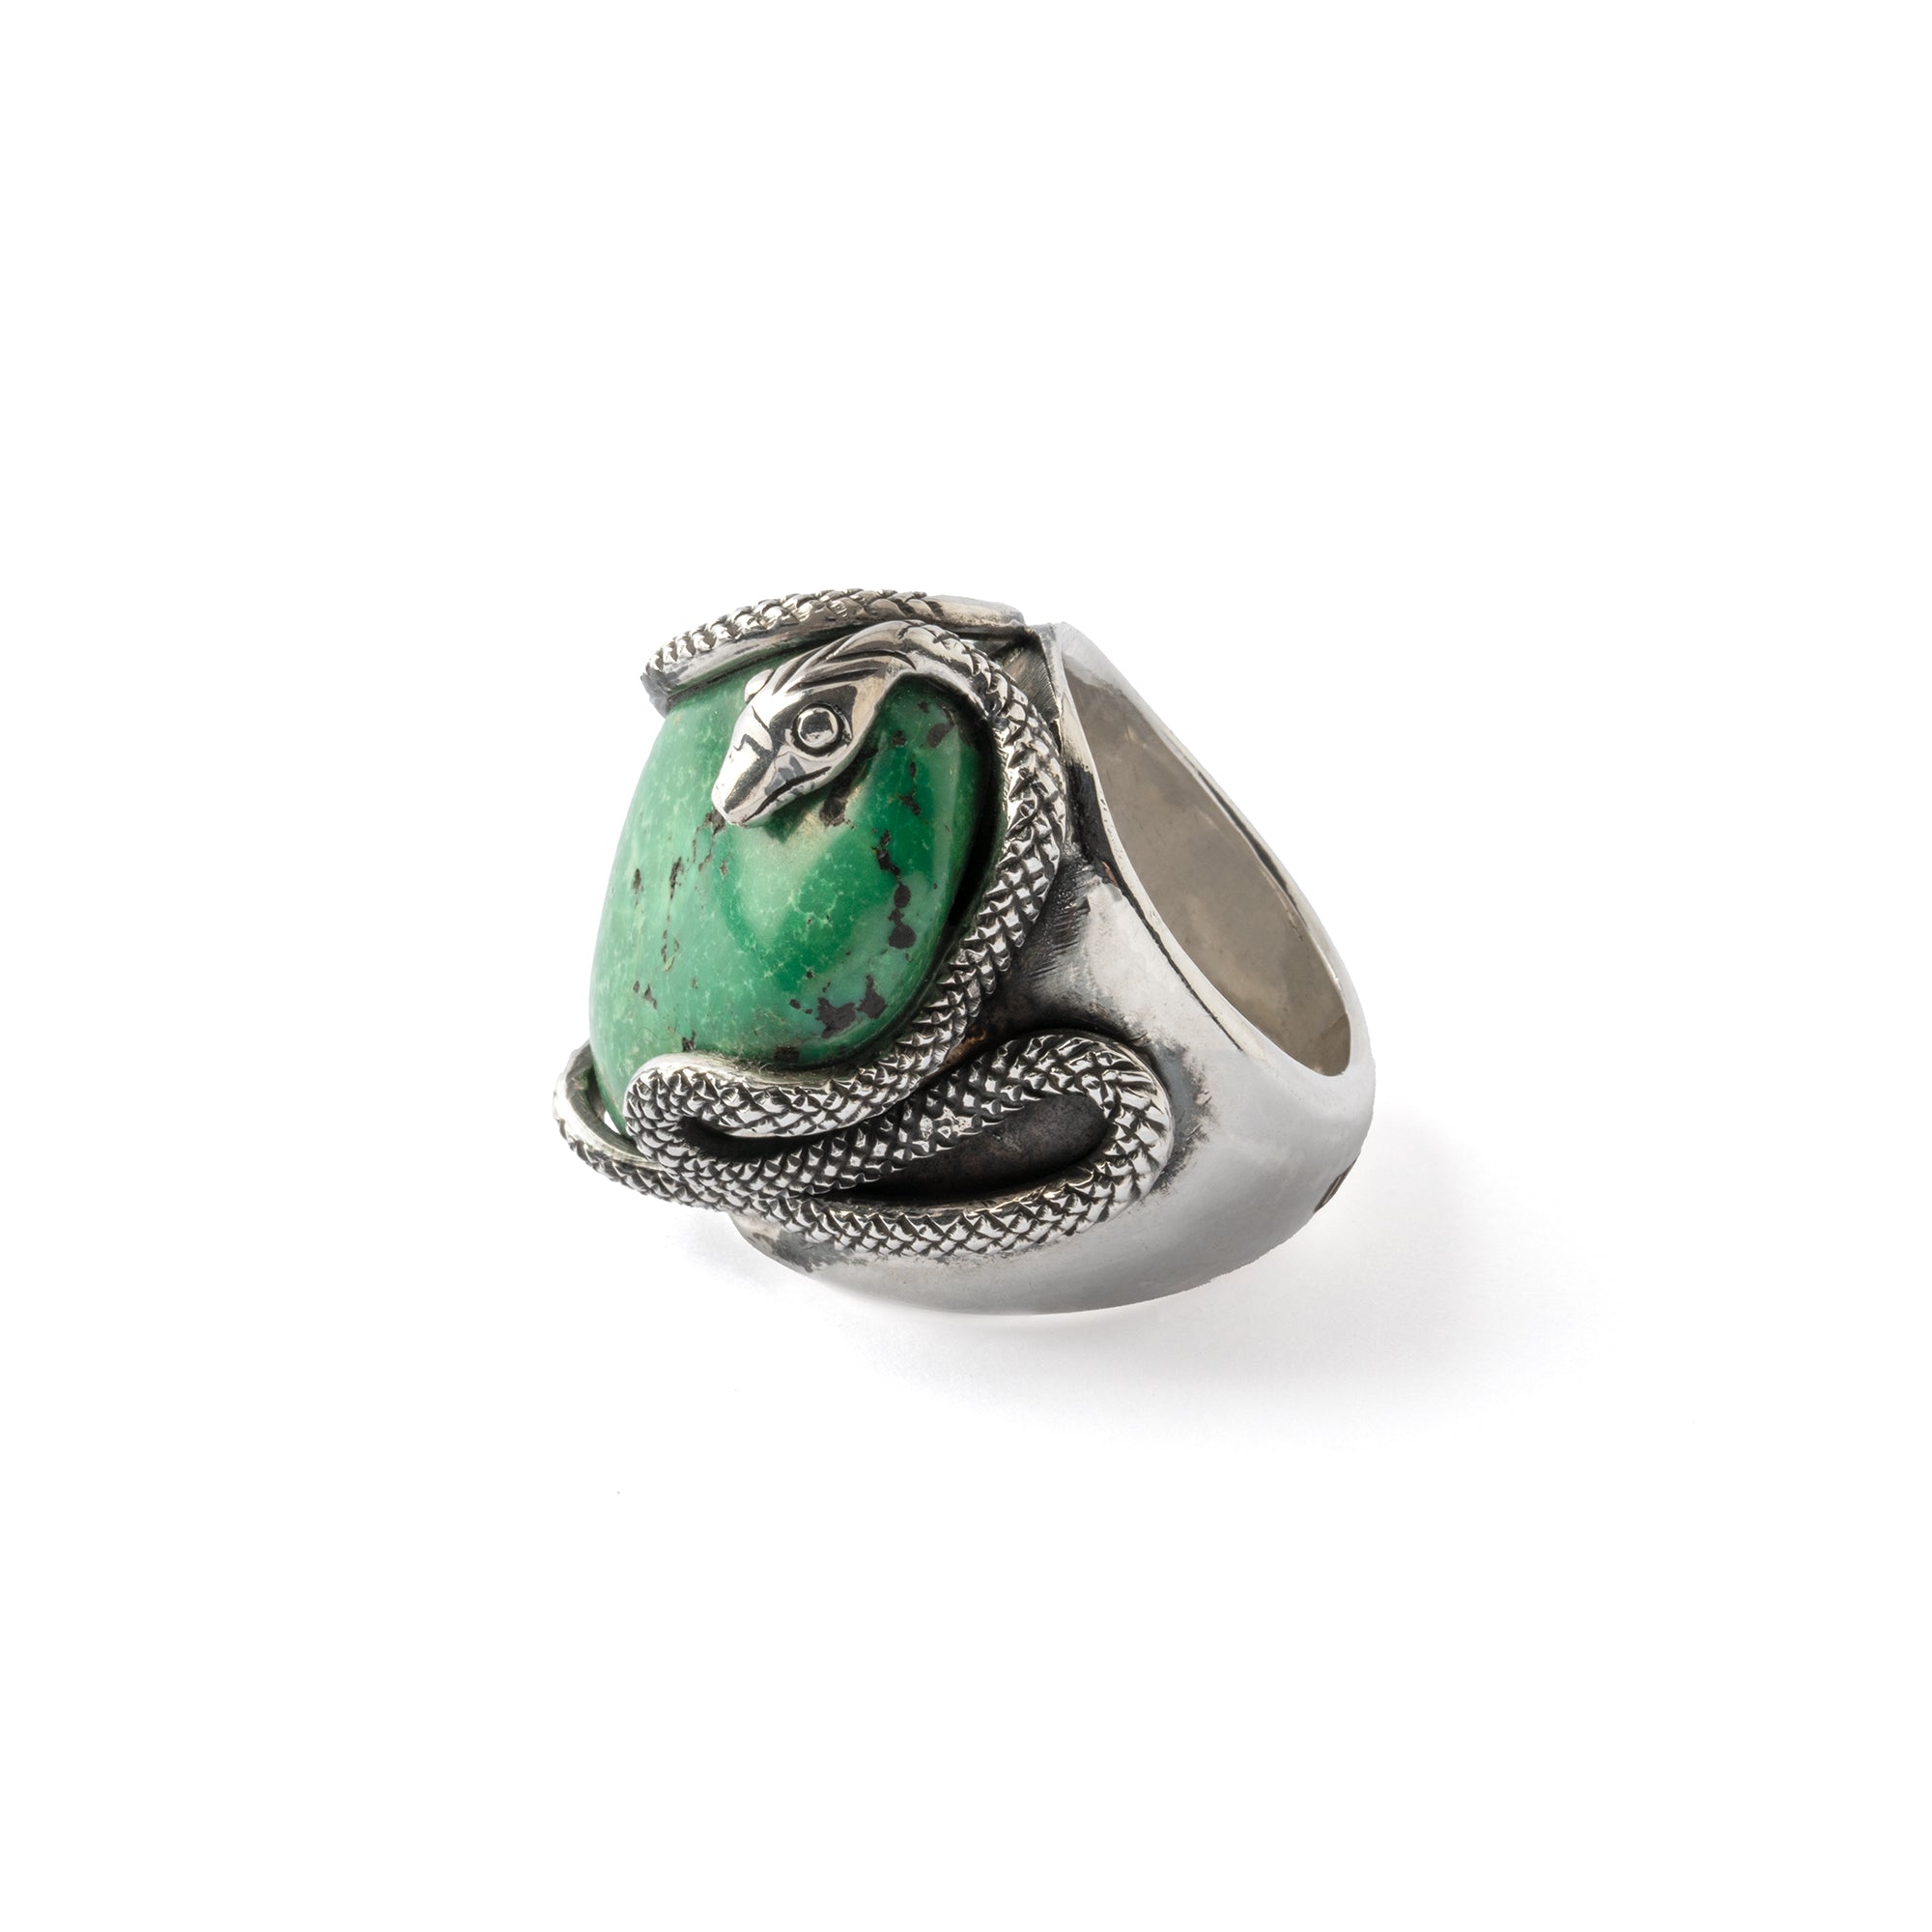 Hallmarked Silver Snake Ring with Tibetan Turquoise